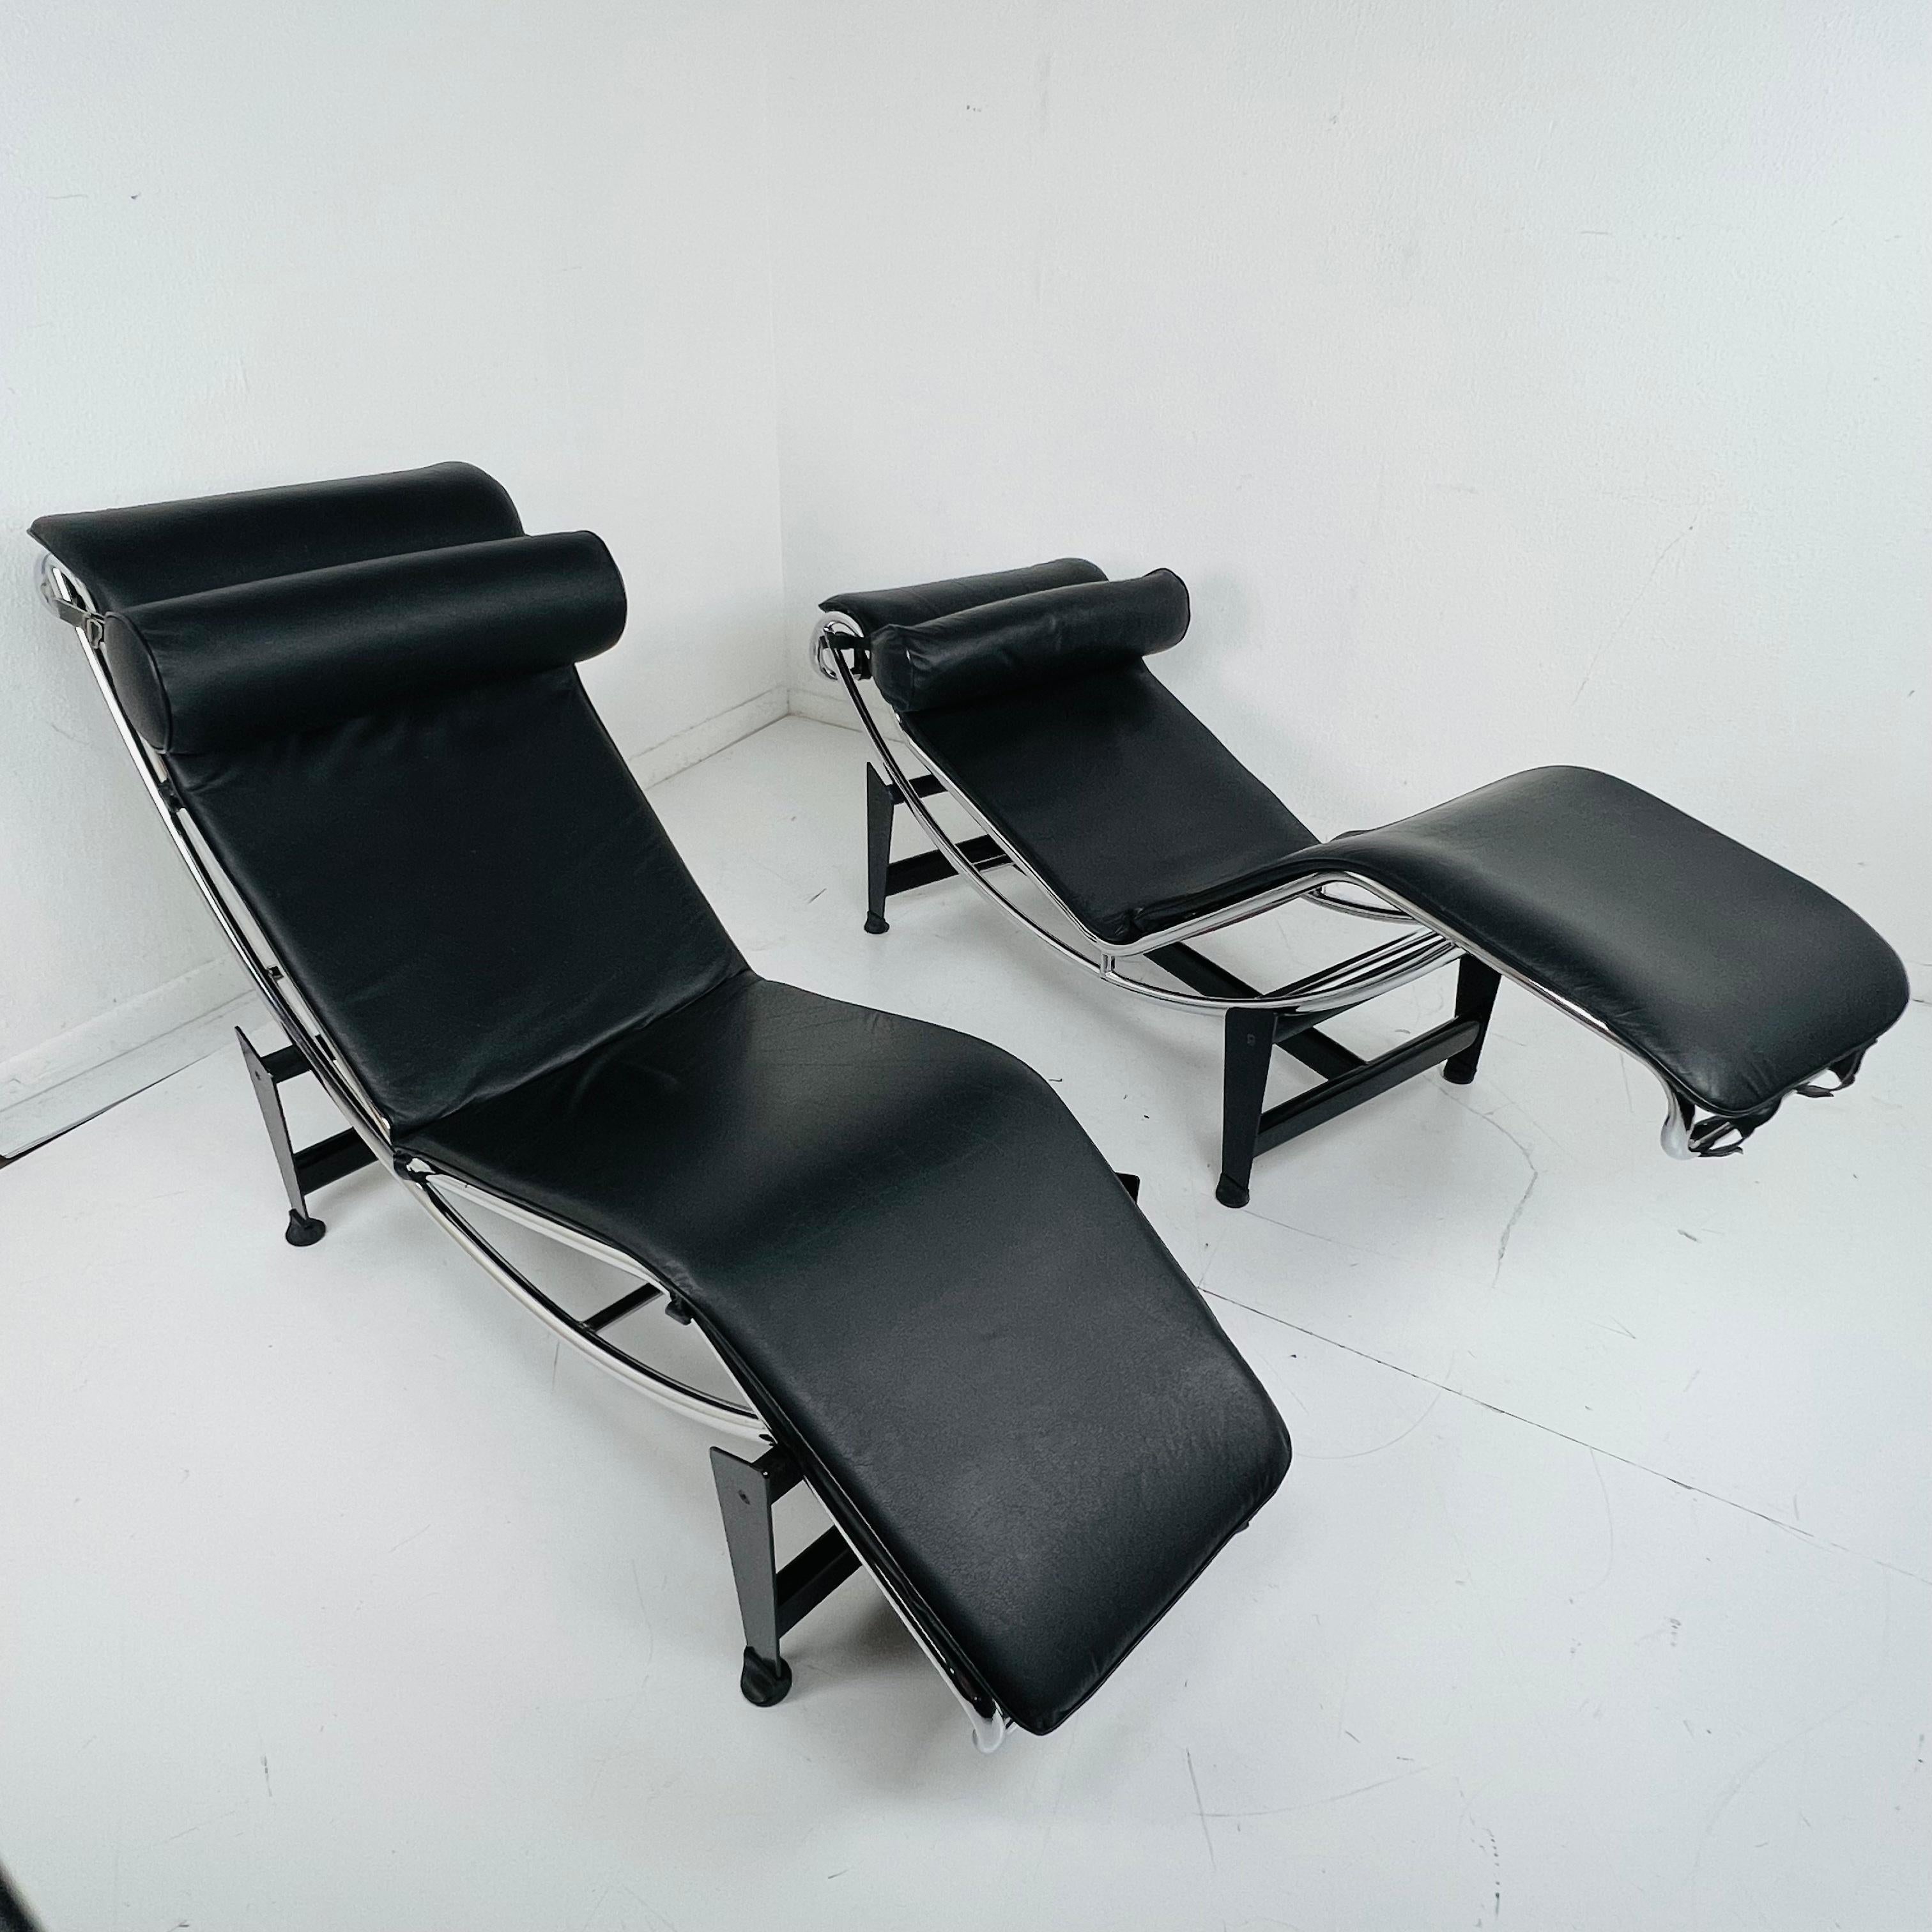 Gorgeous Le Corbusier LC4 style leather chaise lounge. Upholstered in soft black leather with foam interior. Lounge is in two-parts, lifting free of the chromed tubular steel base, allowing for infinite number of seating positions, as the moveable